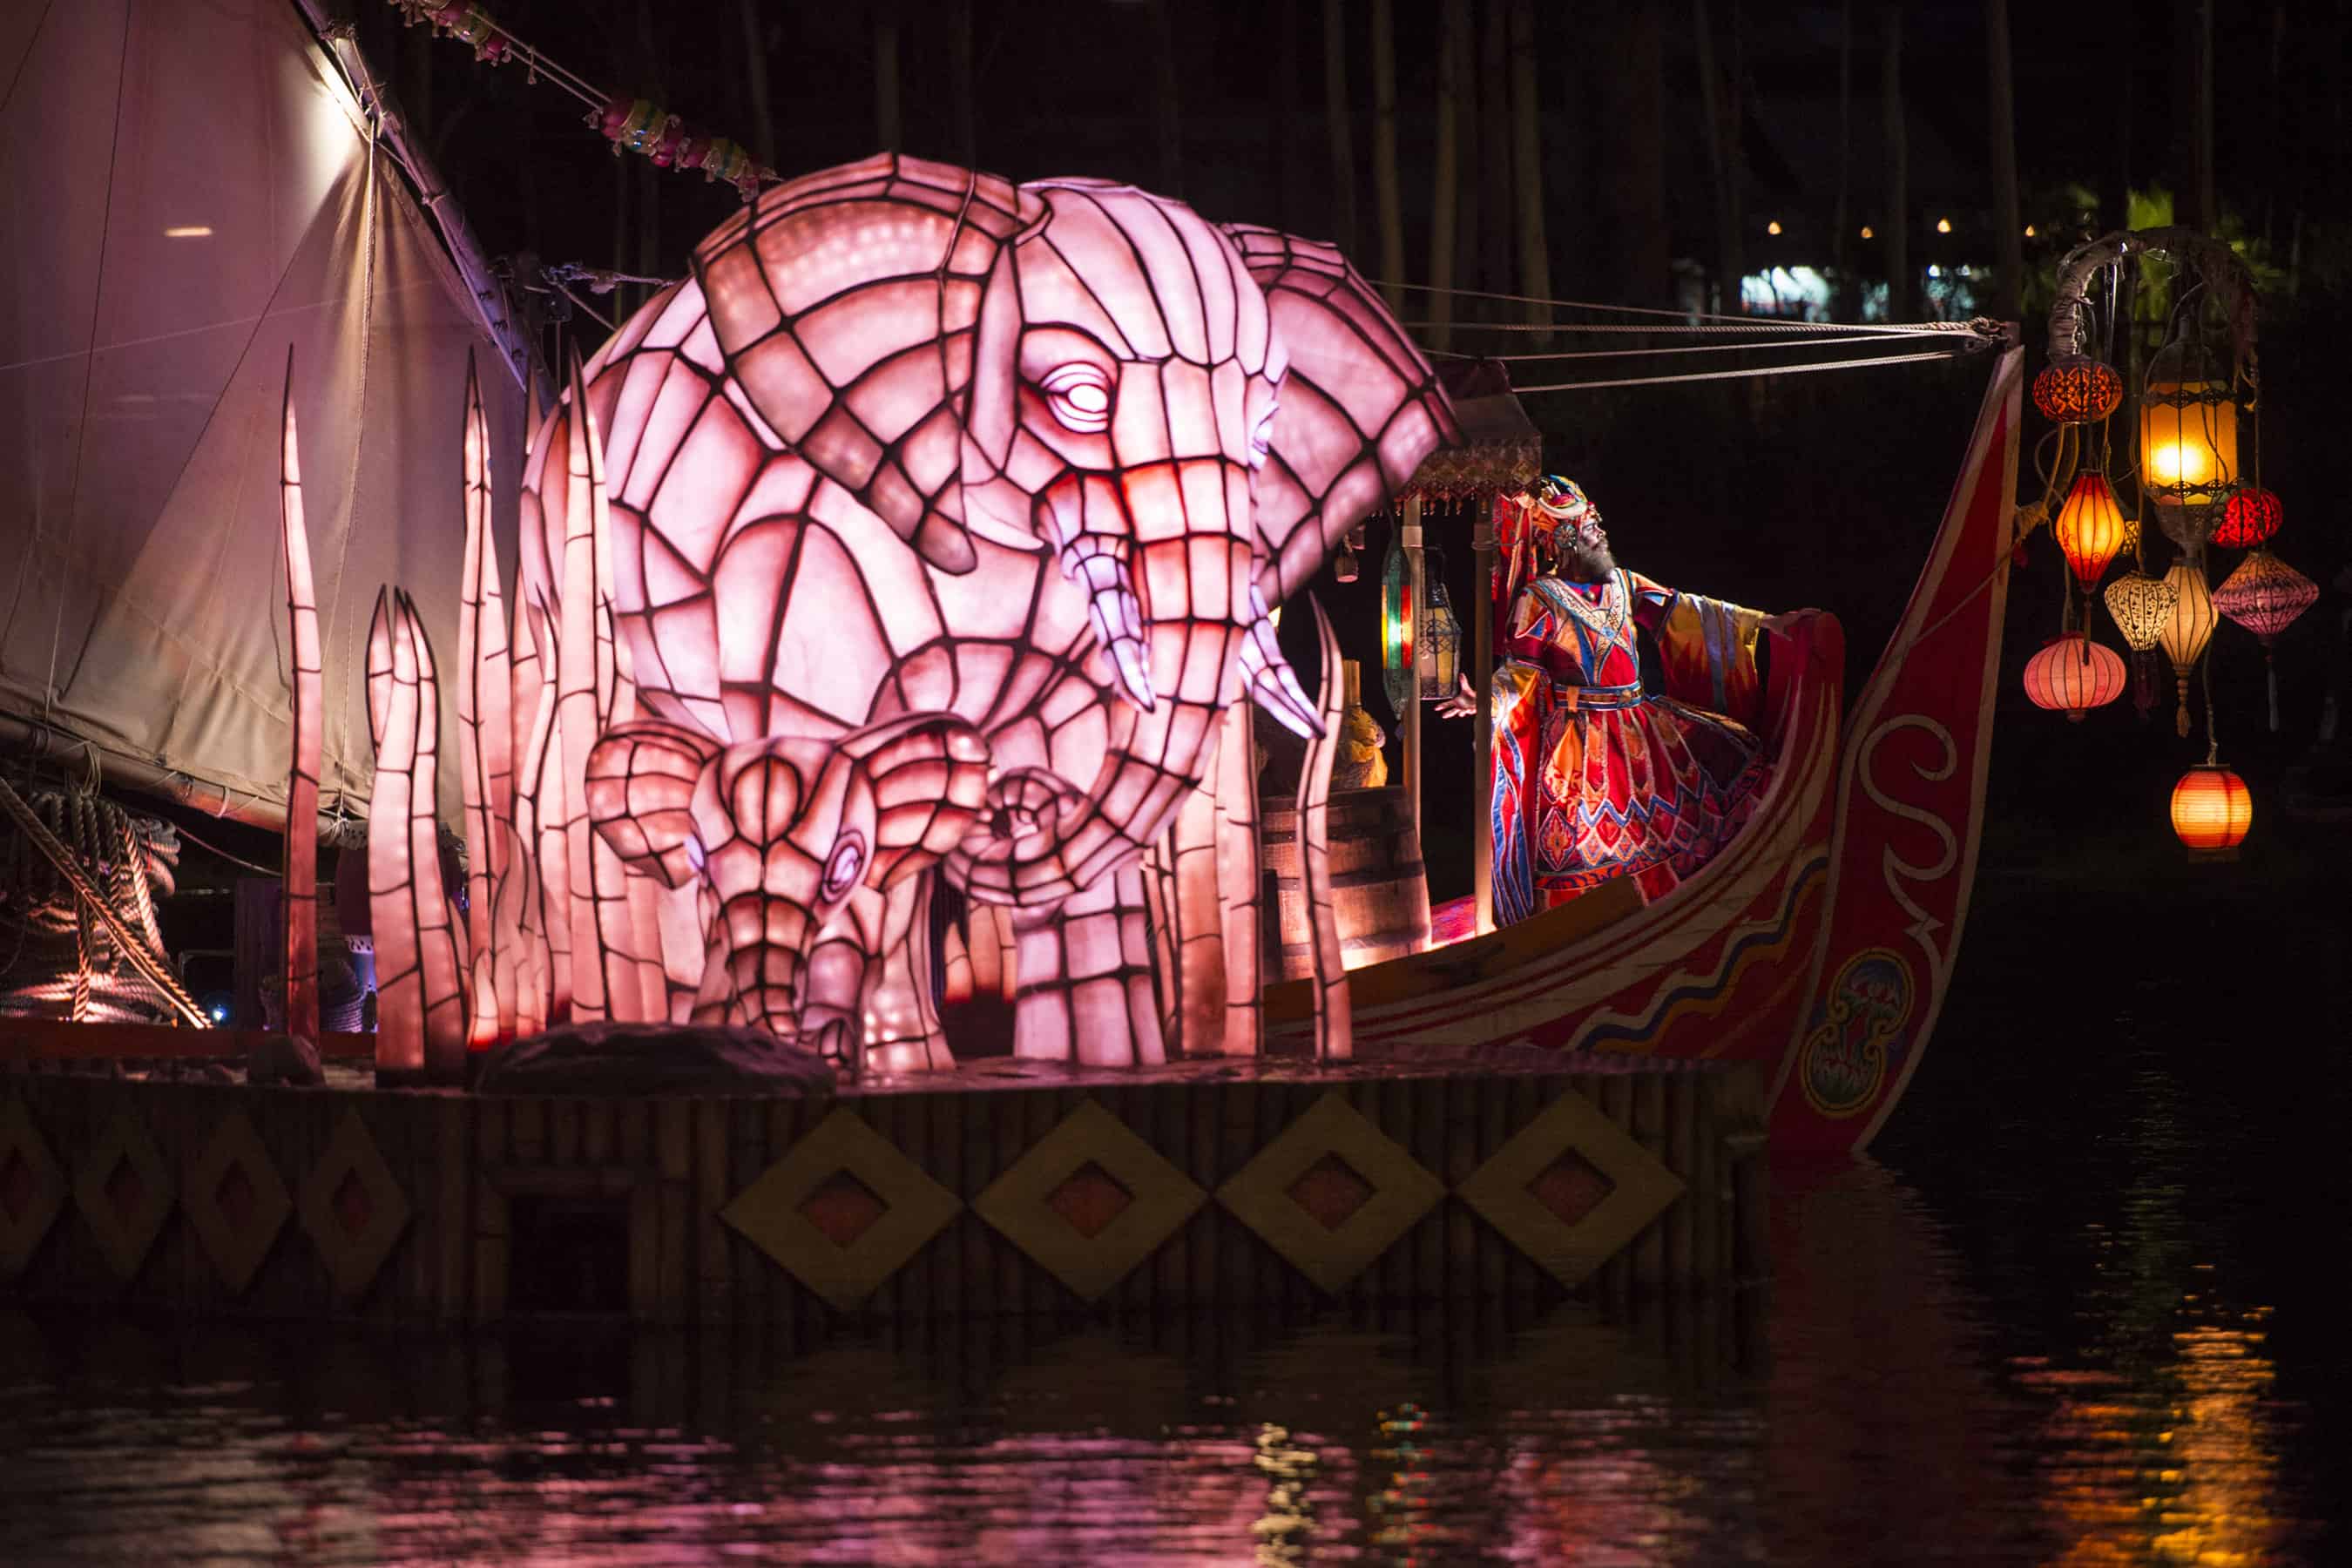 Animal Kingdom’s new Rivers of Light nighttime experience brings the beauty of nature to life with color changing floats, fountains, water screens, music, and much more. 